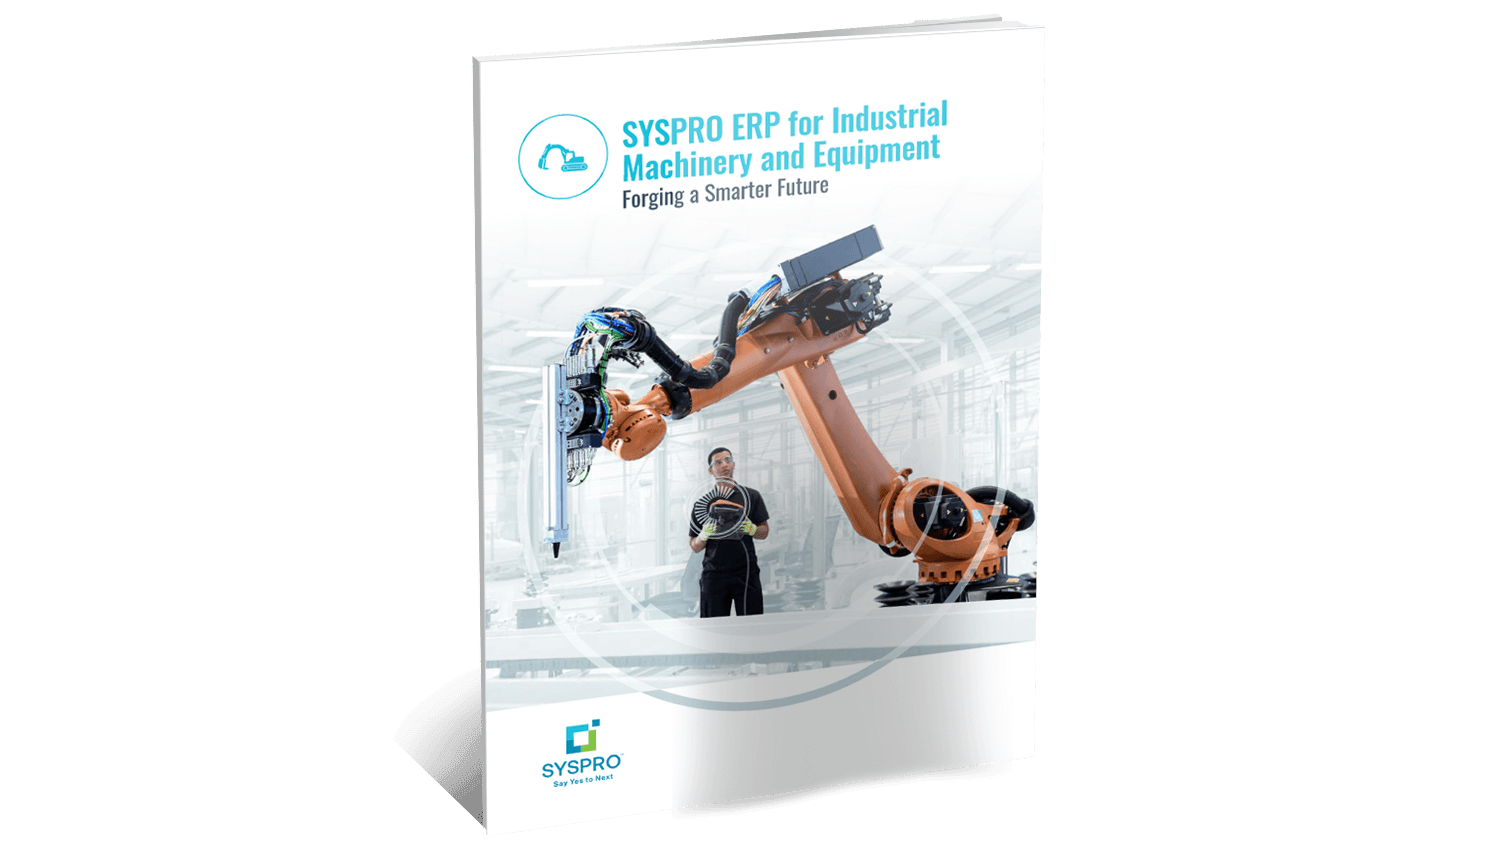 SYSPRO-ERP-software-system-industrial_machinery_and_equipment_industry_brochure_thumbnail